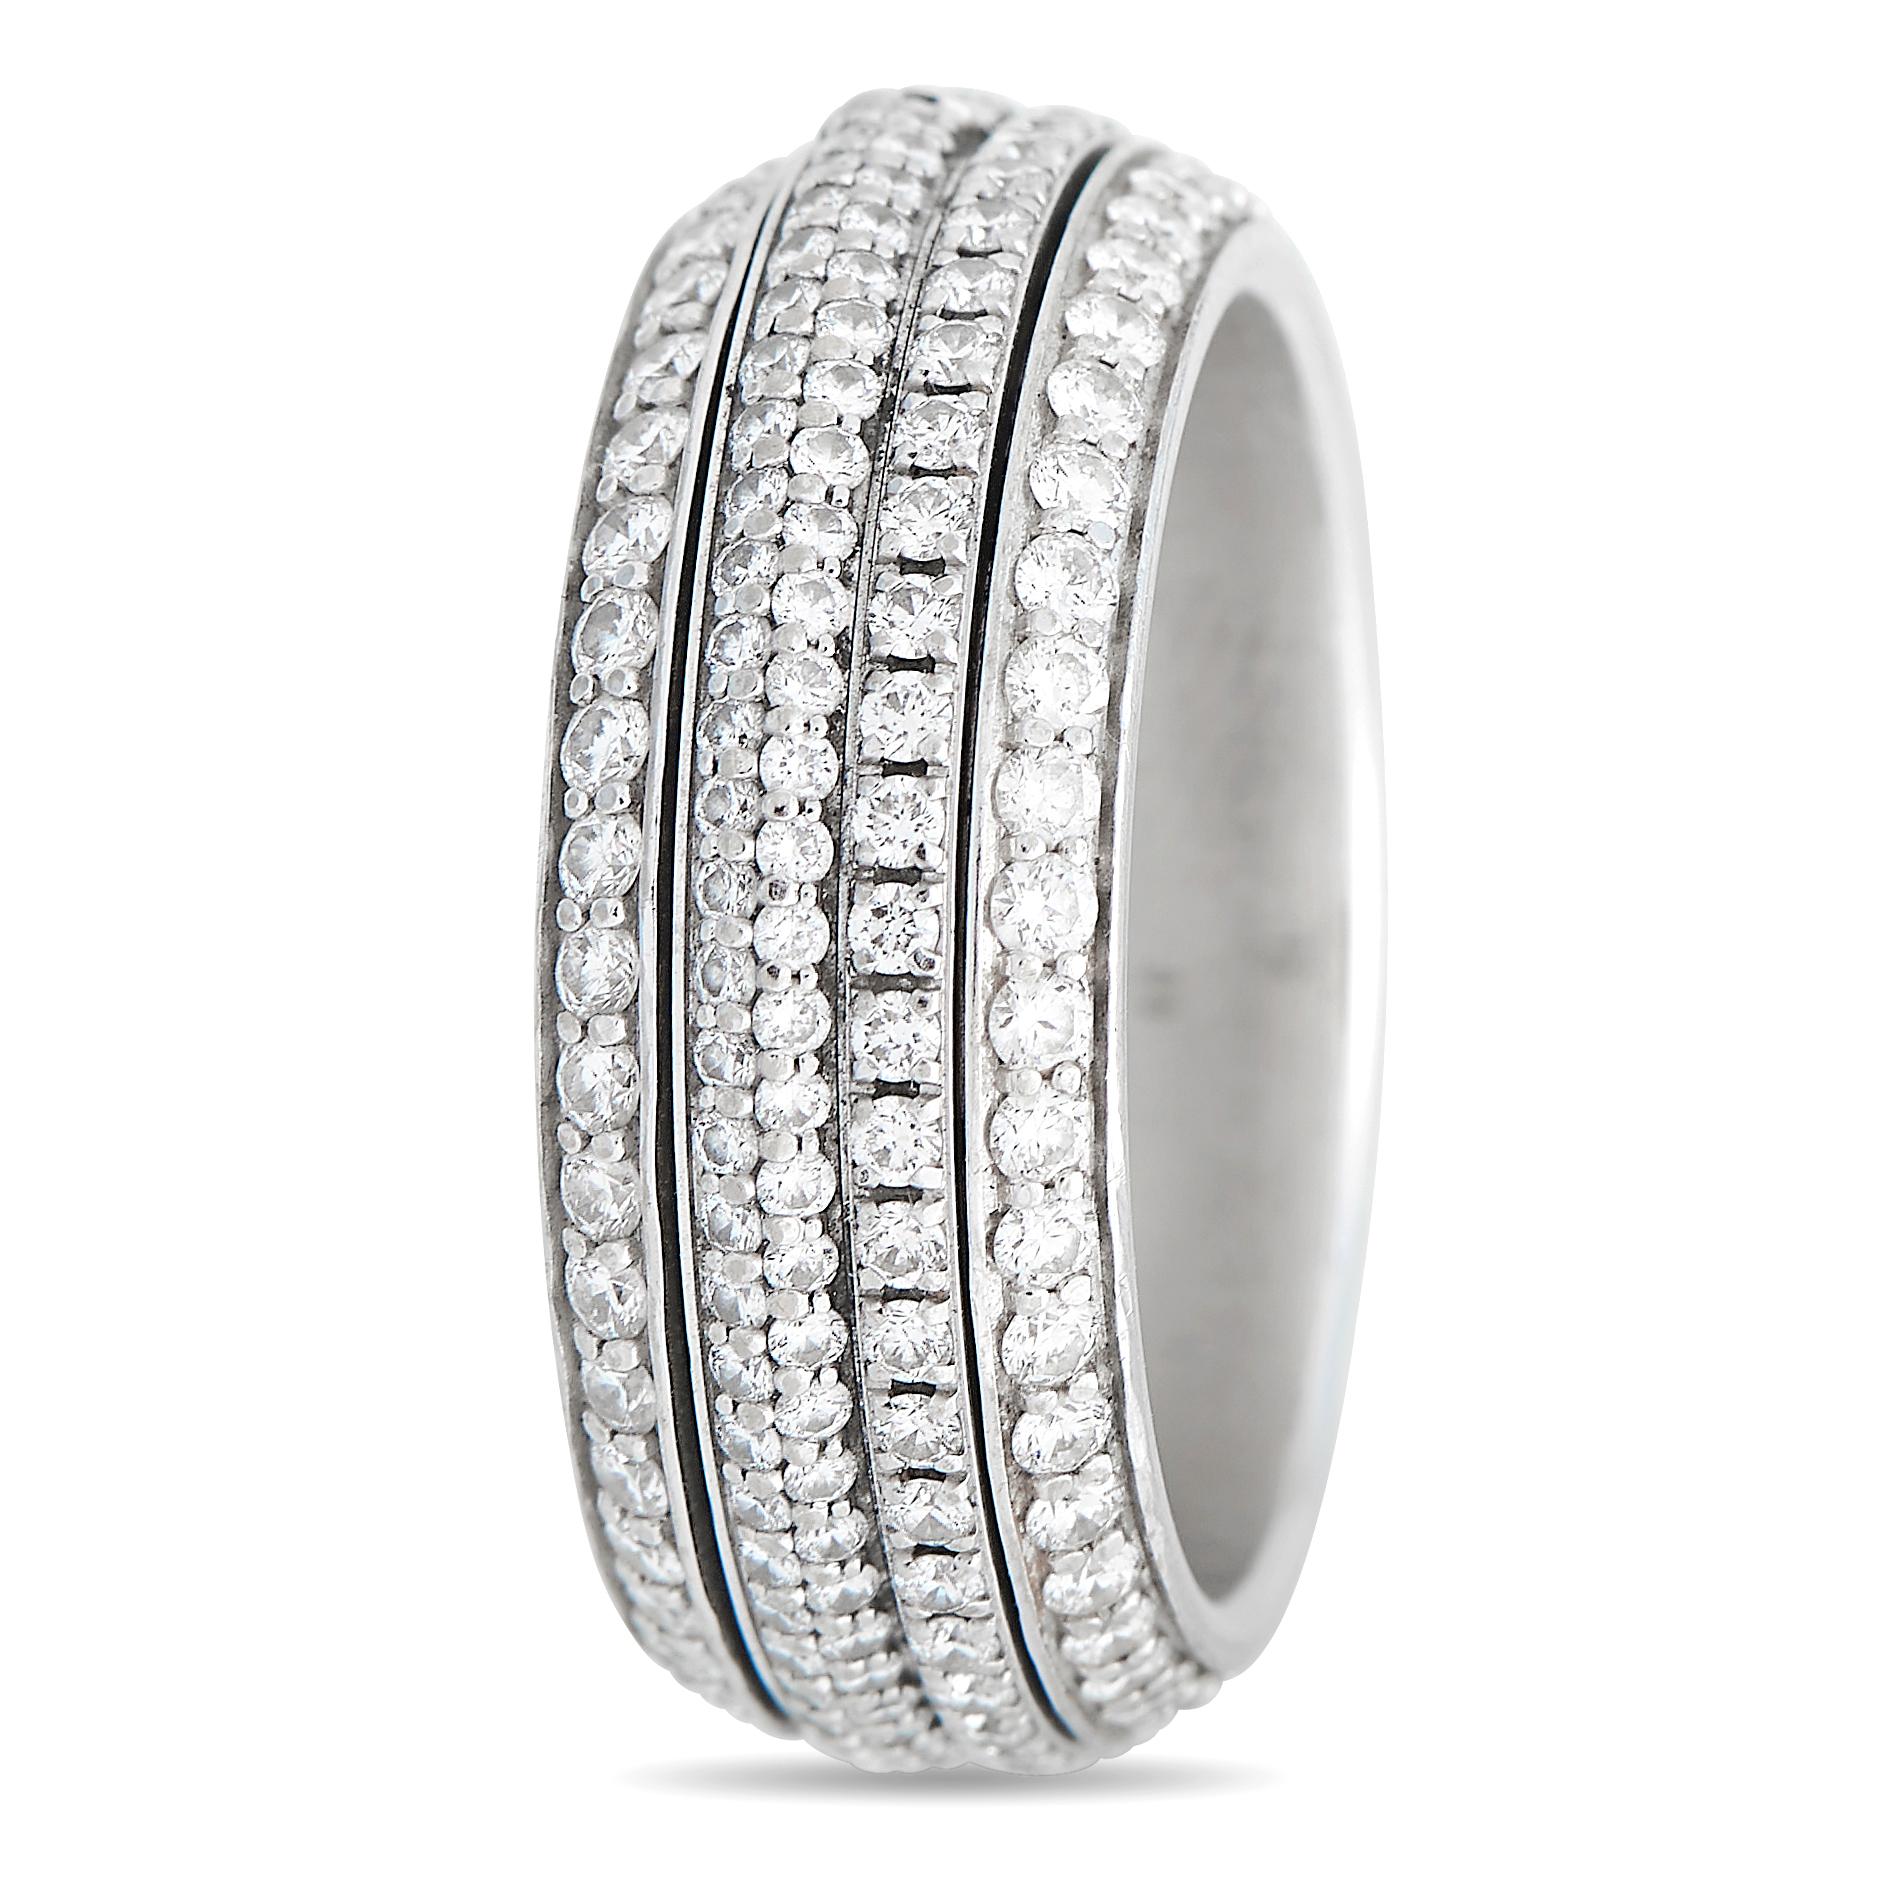 Luxurious and playful, this medium-model Possession Ring from Piaget sparkles and turns with grace and elegance. It features a wide band comprised of four slender asymmetric rings put together, with central rings that can be rotated 360 degrees in